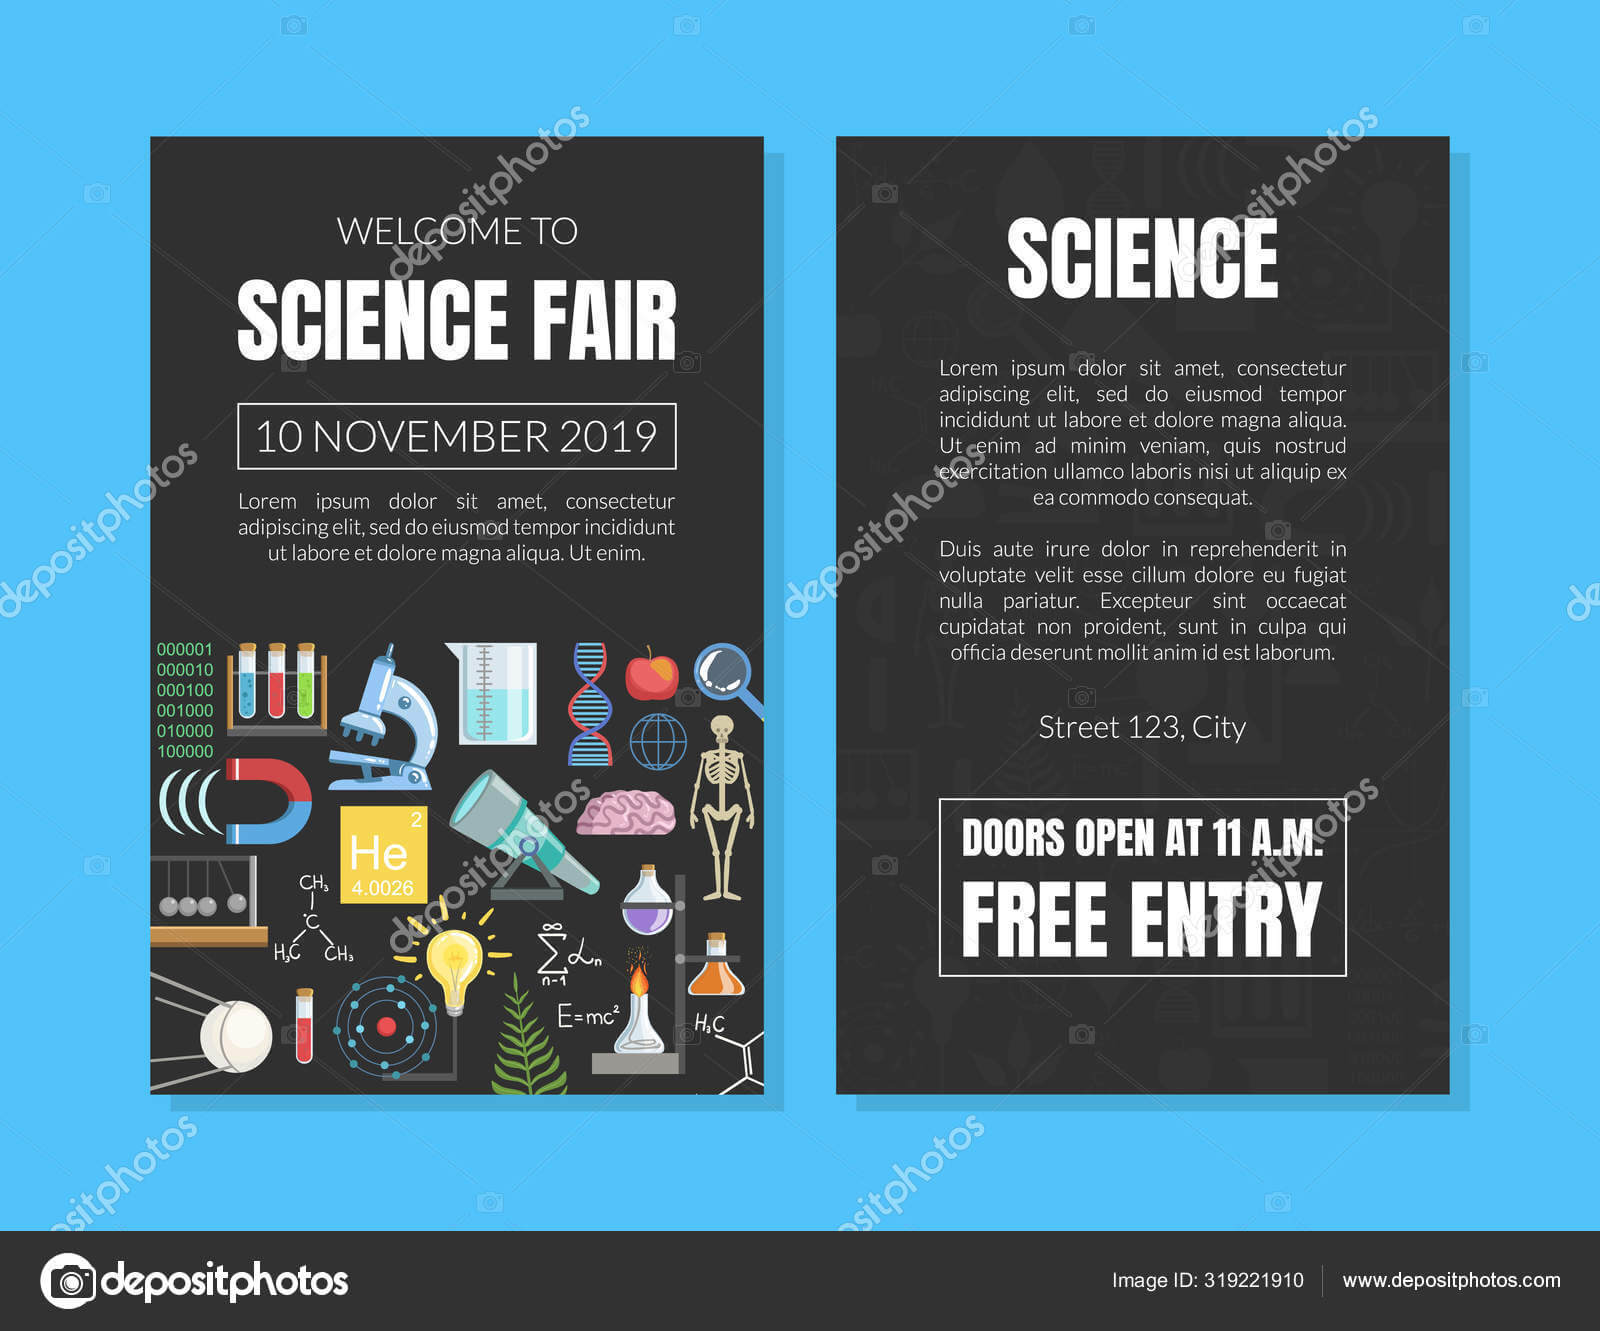 Welcome To Science Fair Invitation Card Template, Scientific Inside Science Fair Banner Template